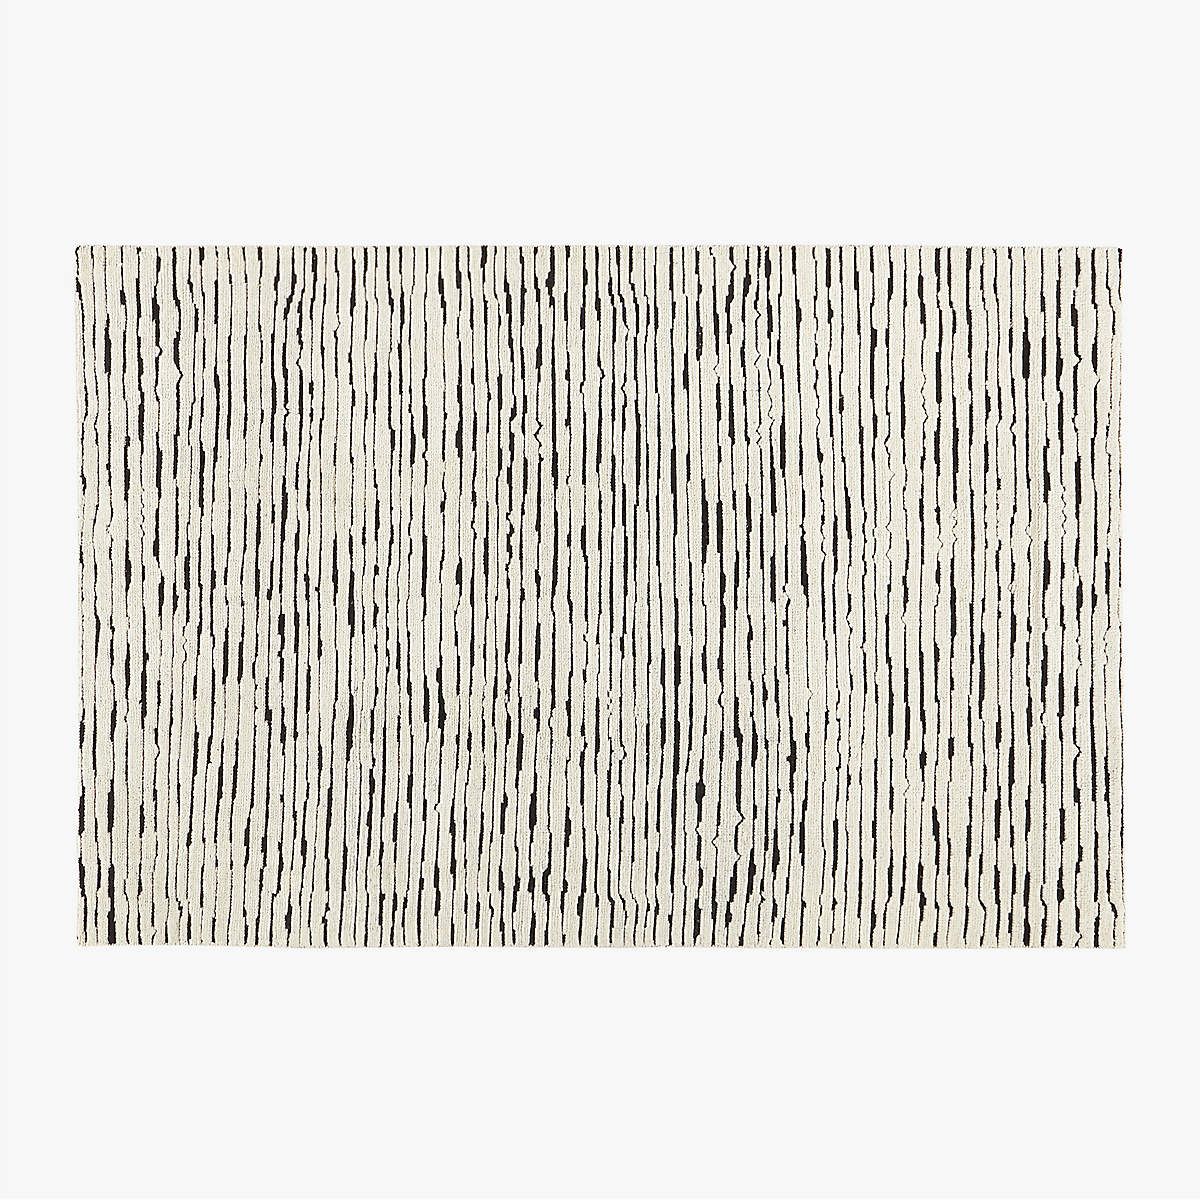 Levi Handknotted New Zealand Wool Black and White Area Rug | CB2 | CB2